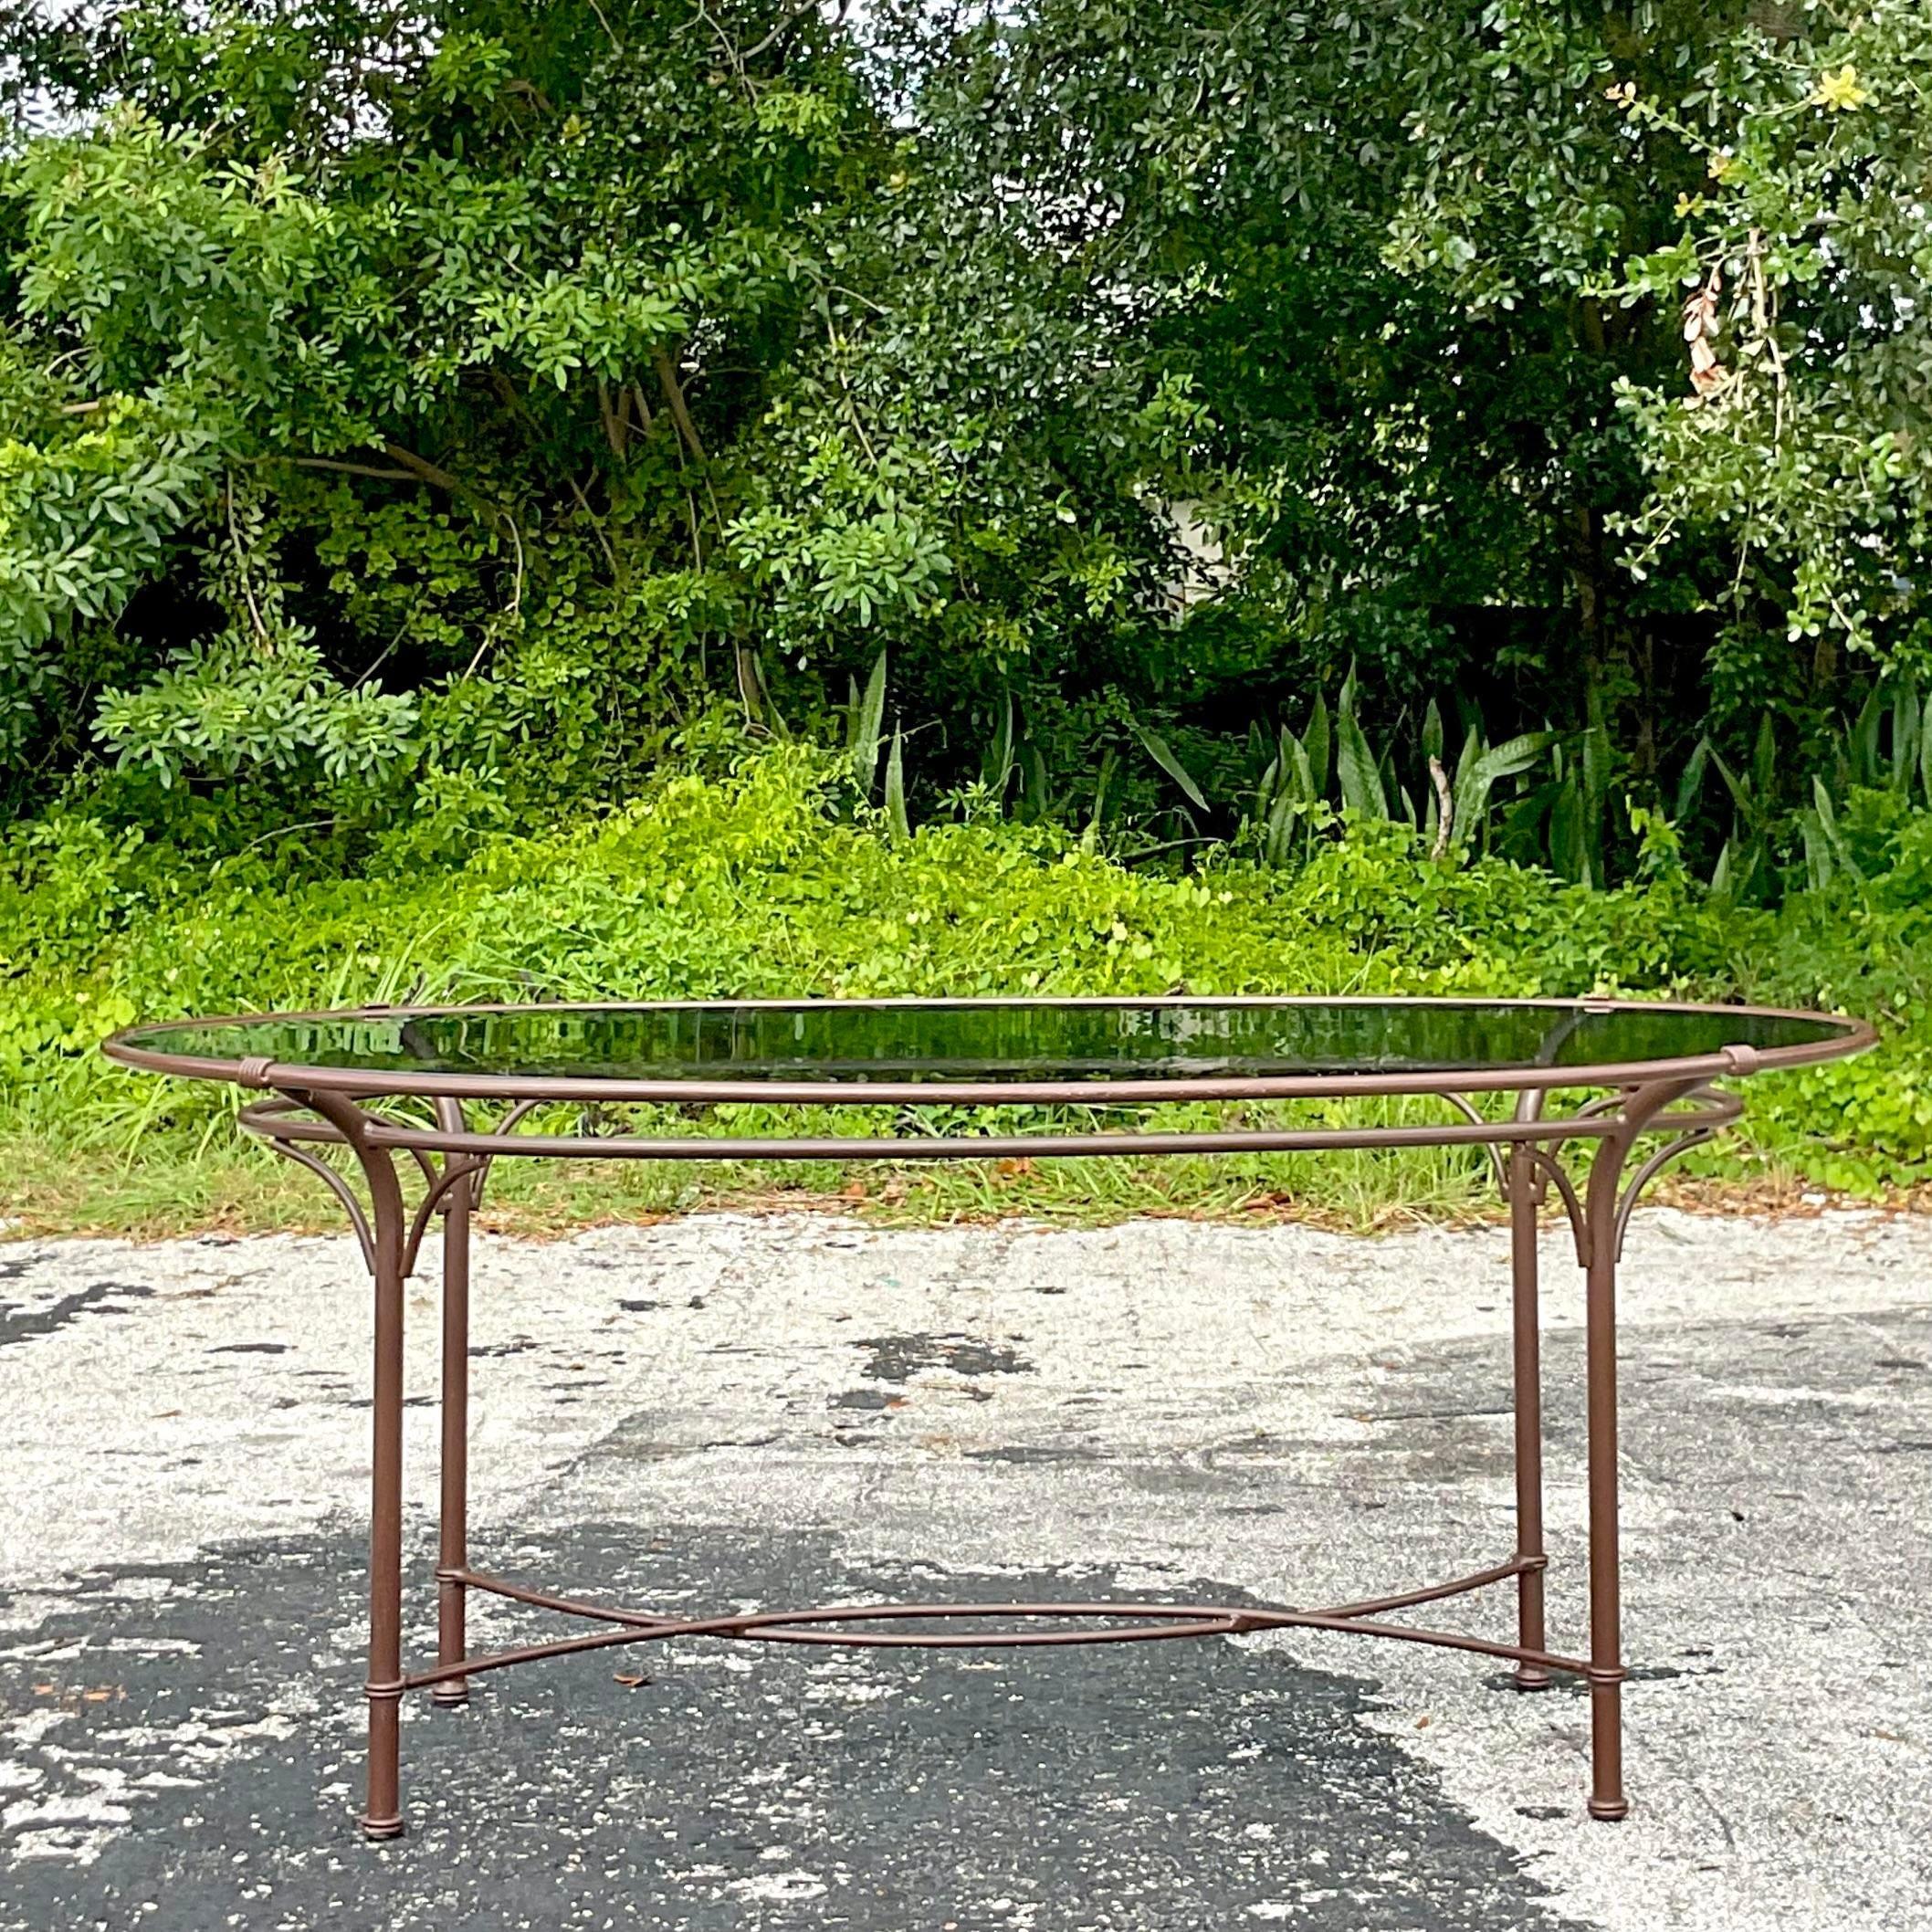 A fantastic vintage Coastal cast aluminum outdoor dining set. Made by the iconic Brown Jordan and tagged on the bottom. Part of the coveted Florentine collection. Acquired from a Naples estate.

Arm chair - 22.75 wide
Table - 72x 47.5x29
Seat height